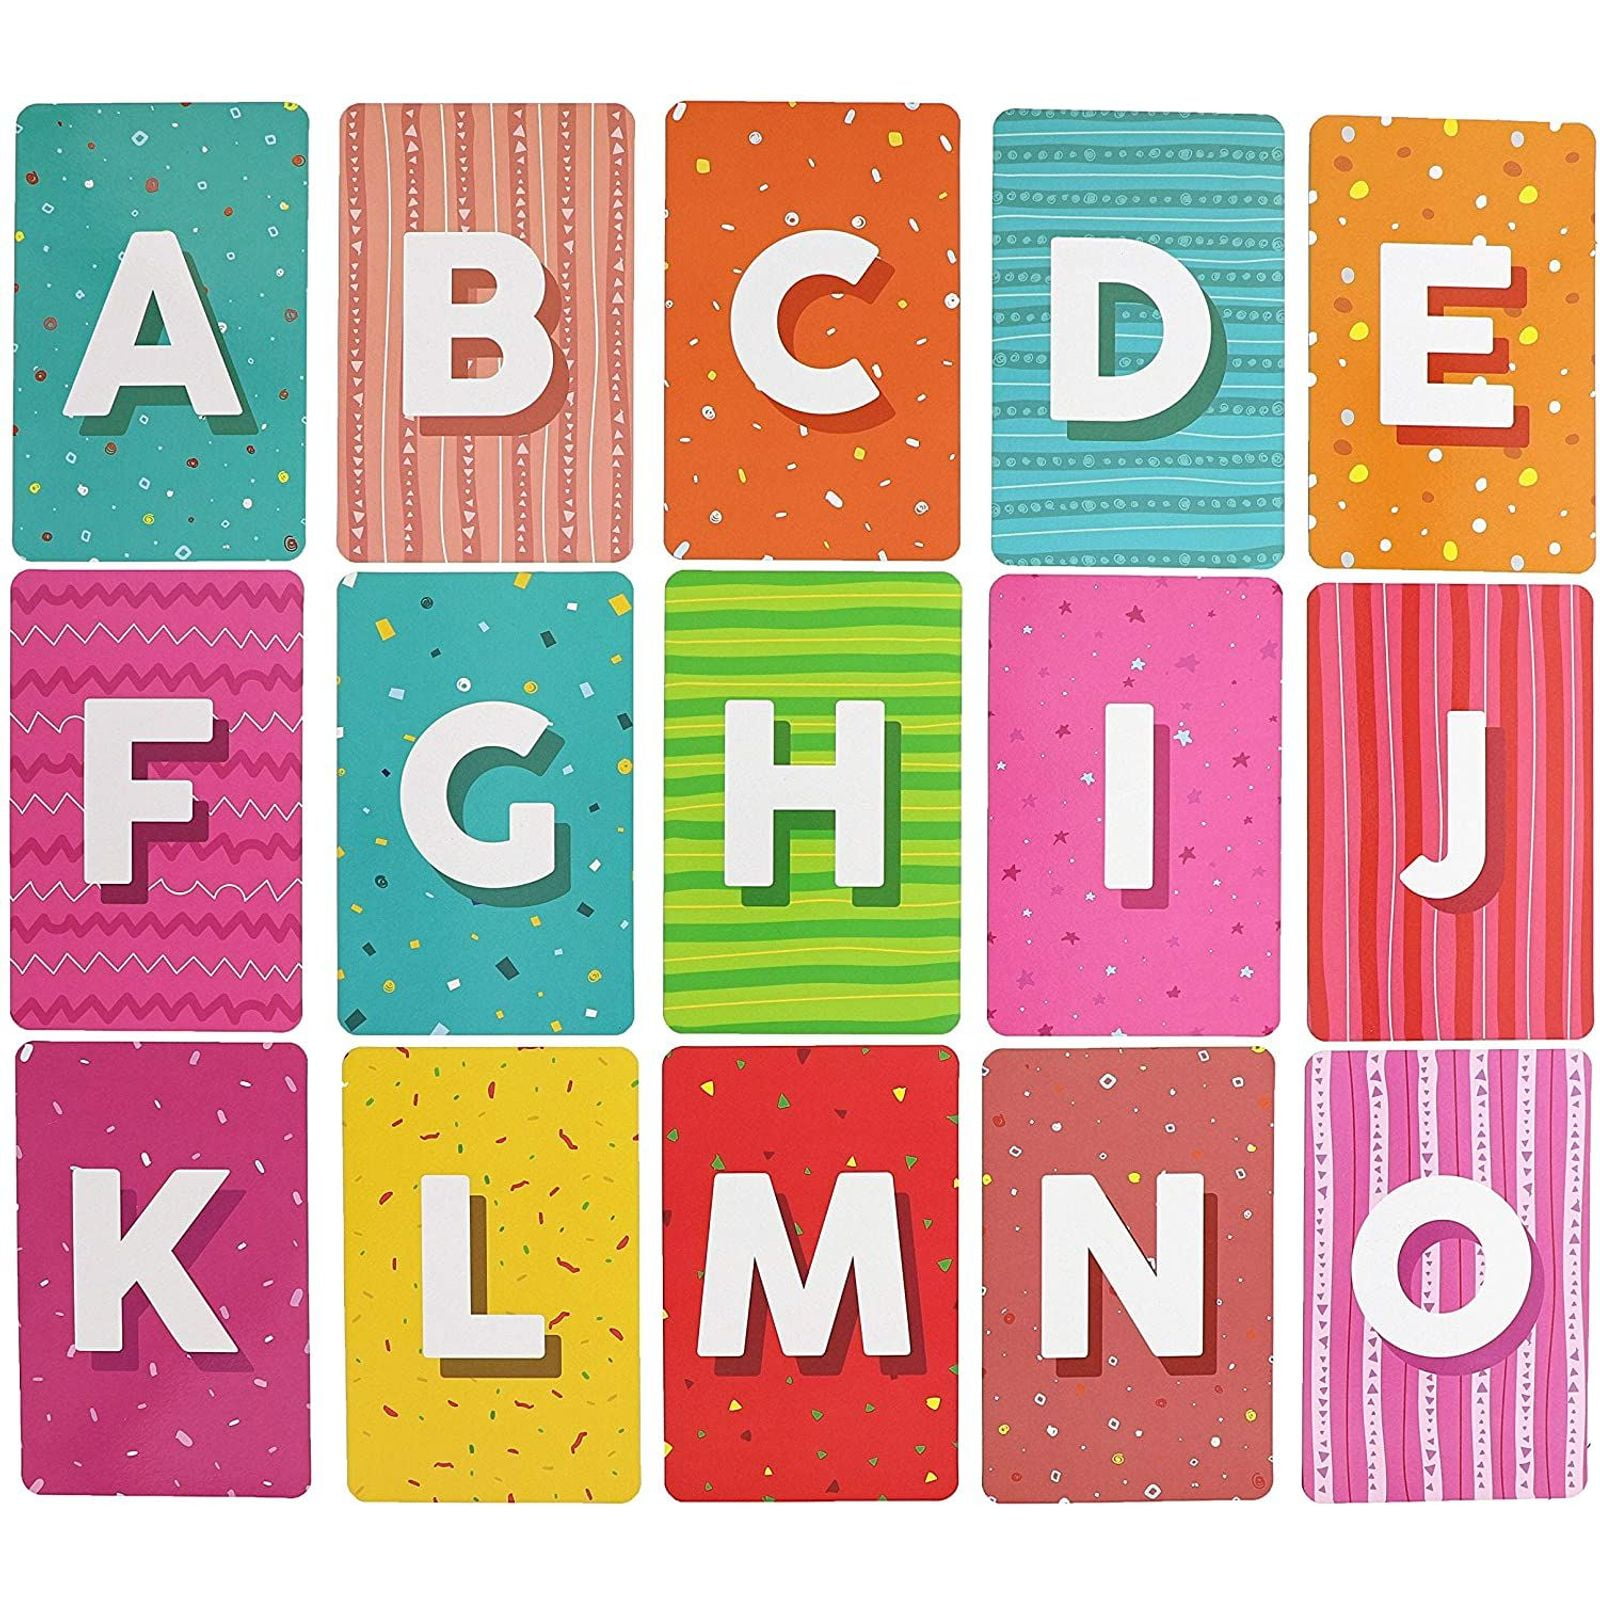 Details about   Alphabet Cards A-Z Kids Toddlers Preschool Early Learning Resource HOT Sen O1Y4 